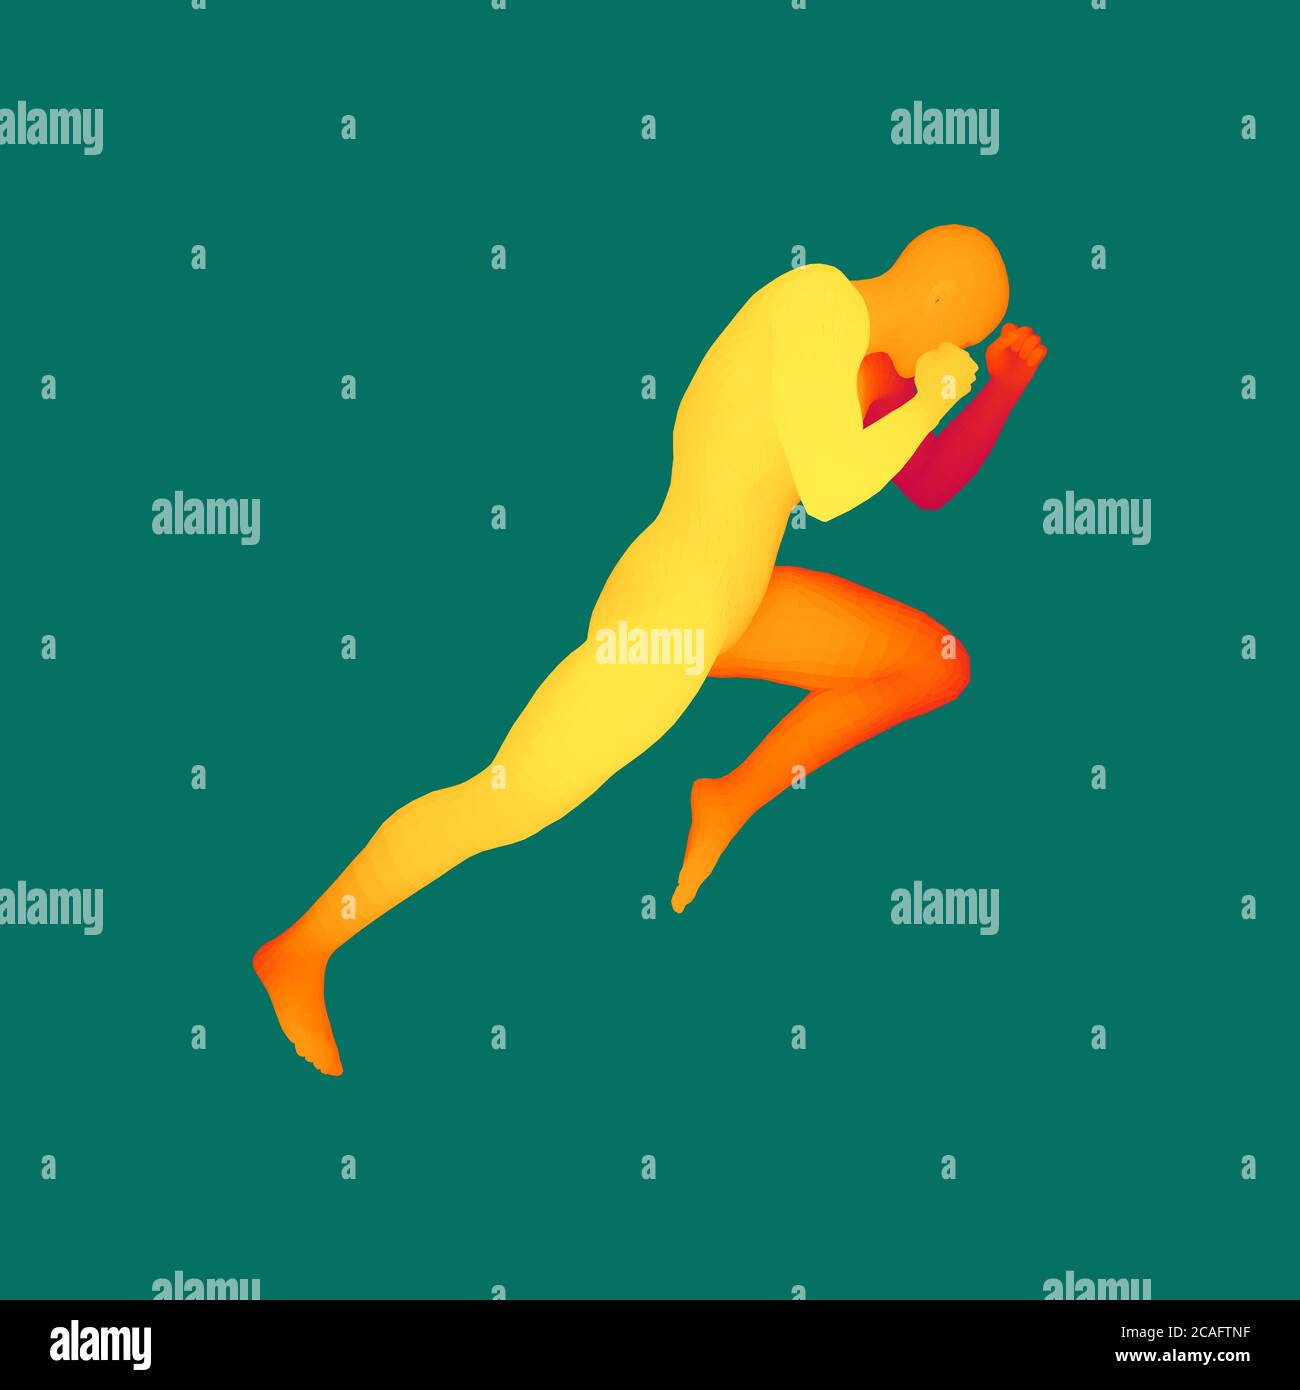 Kickbox Fighter Preparing to Execute a High Kick. Fitness, Sport, Training and Martial Arts Concept. 3D Model of Man. Human Body. Design Element. Vect Stock Vector